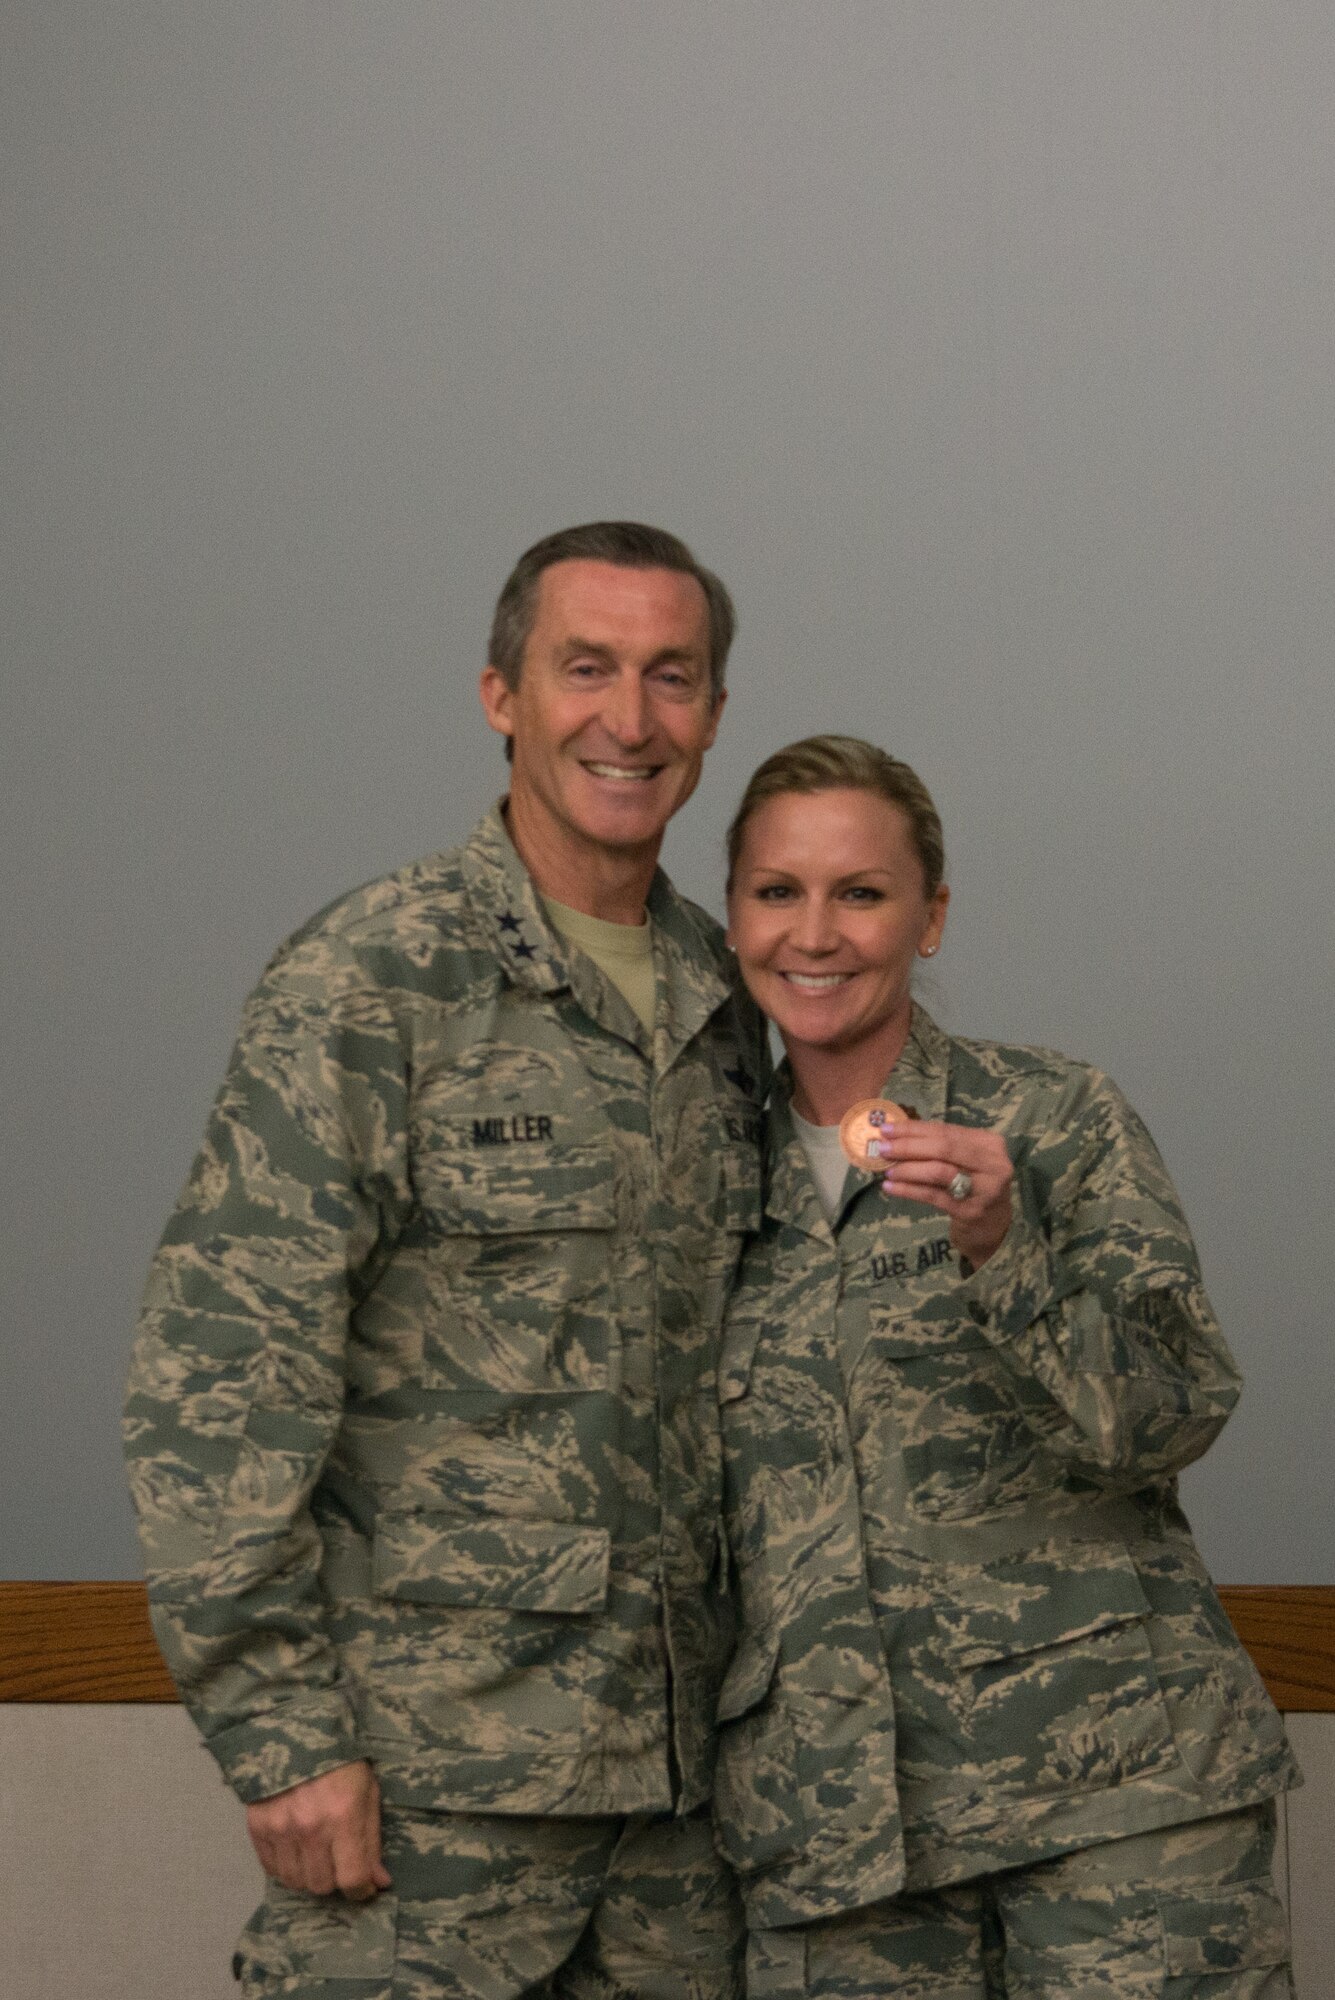 Maj. Sabrina Ura received a coin from Tenth Air Force Commander, Maj. Gen. Ronald B. “Bruce” Miller in recognition of her contribution to the conference.